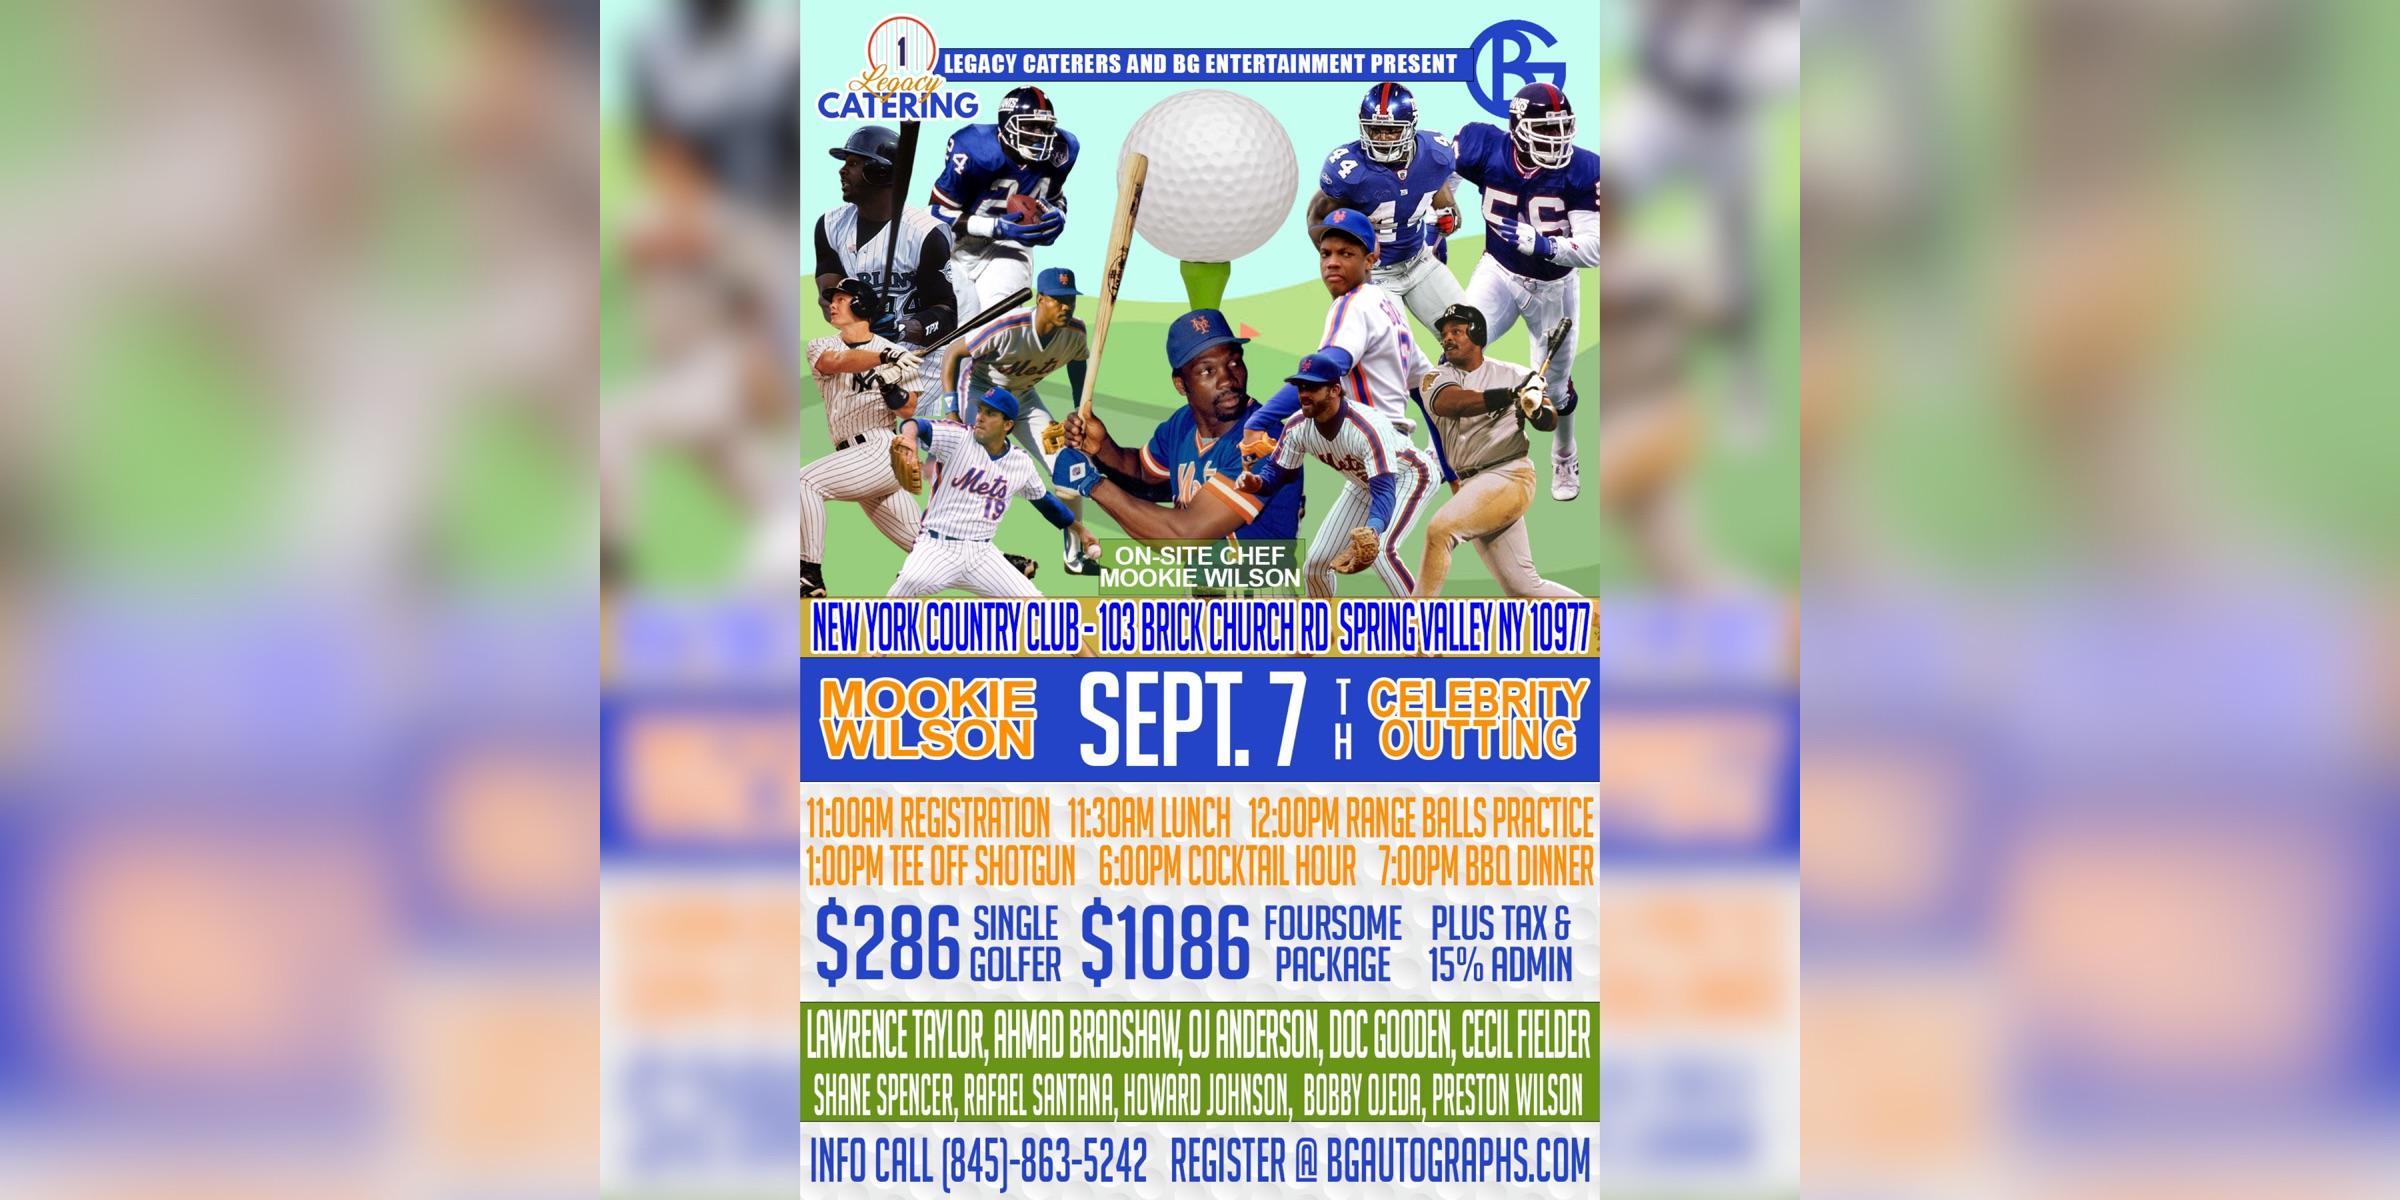 Mookie Wilson 1st Annual Celebrity Golf Outing